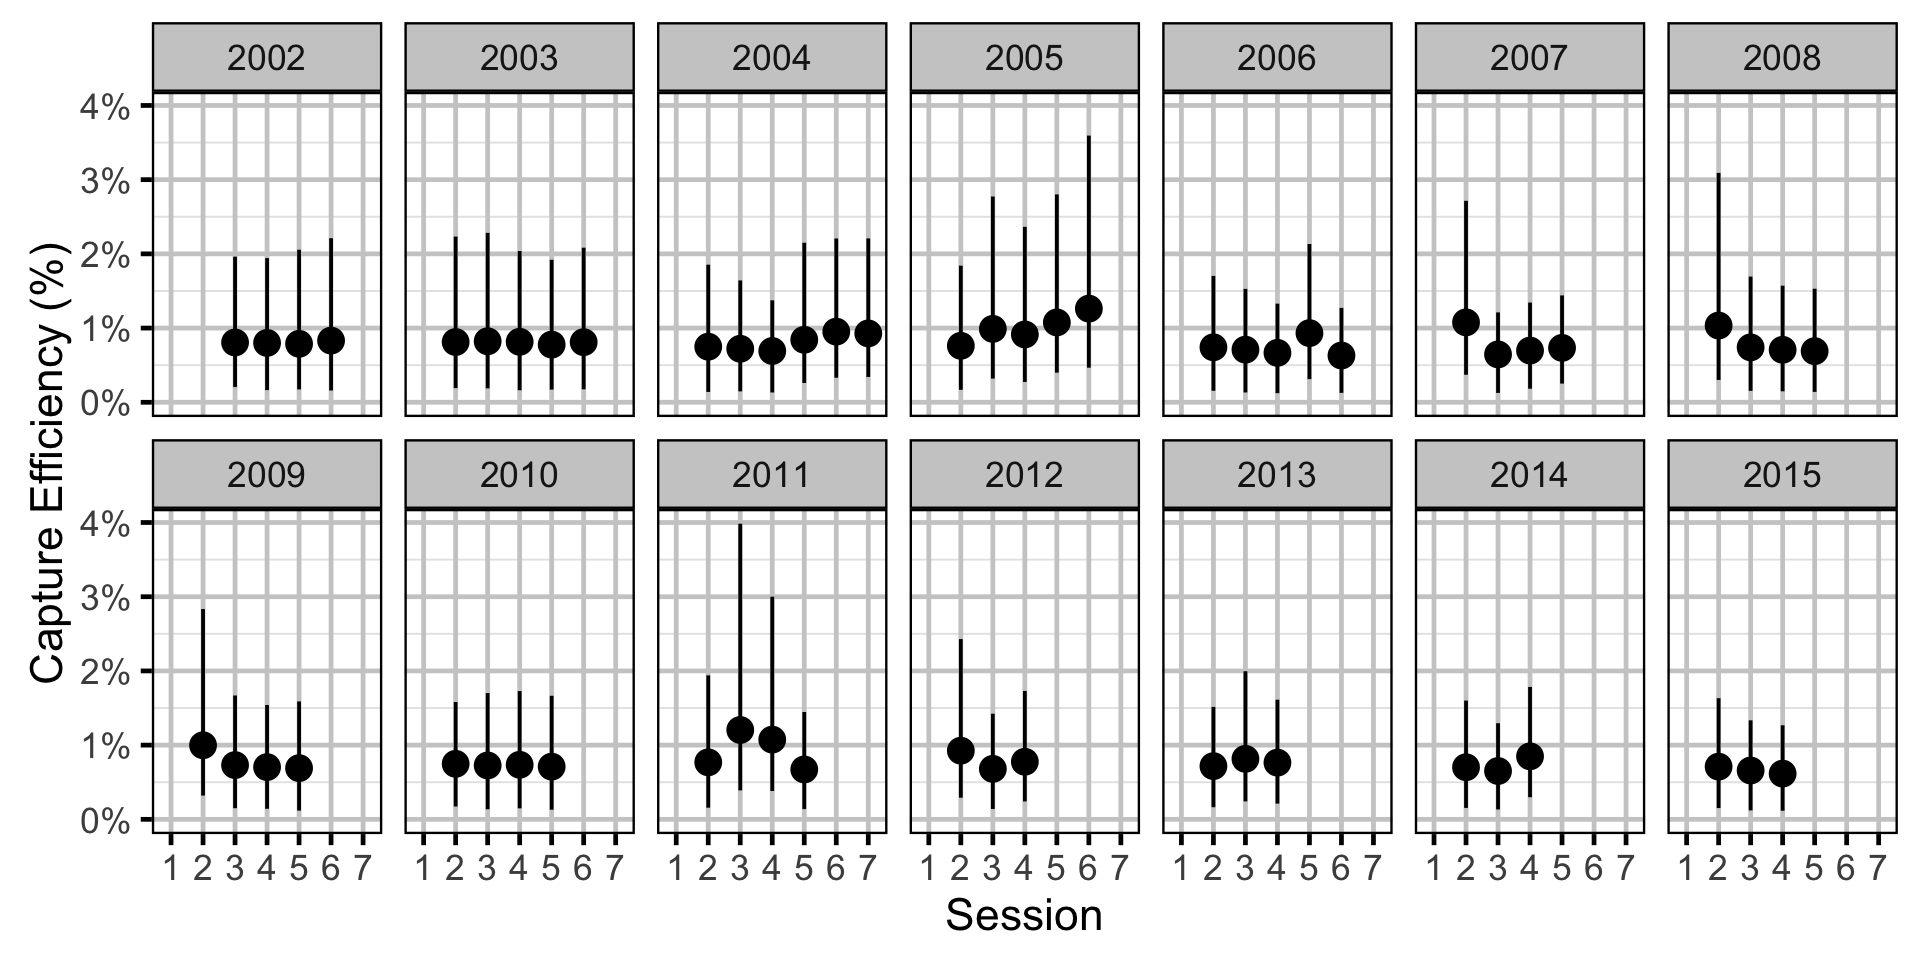 figures/efficiency/Subadult MW/session-year.png